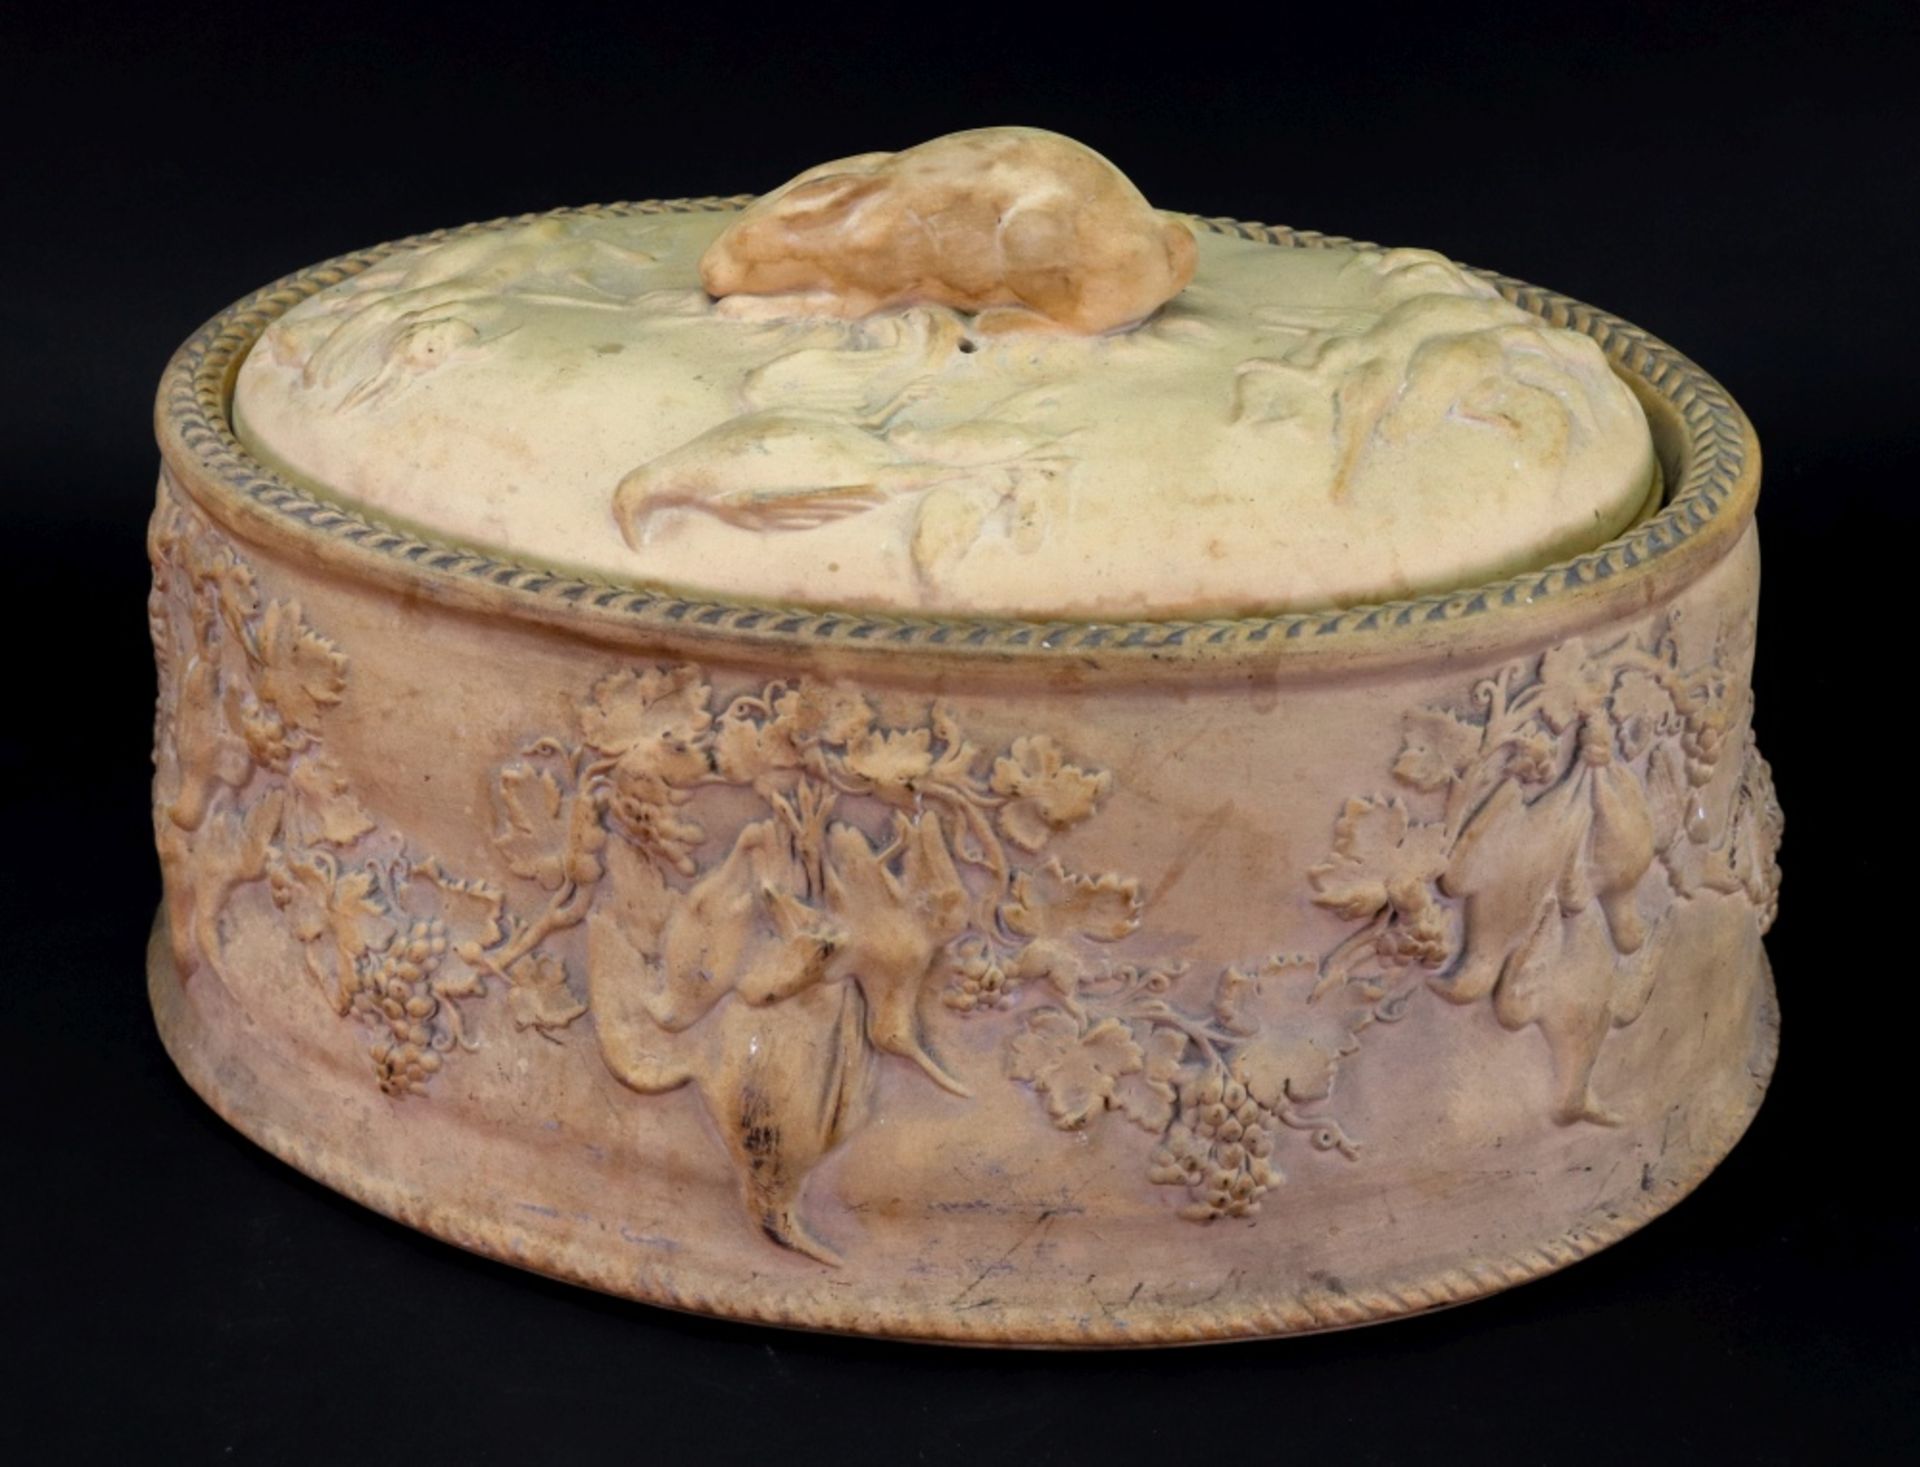 A Wedgwood caneware game pie dish, cover and liner, 19th century, of typical design,